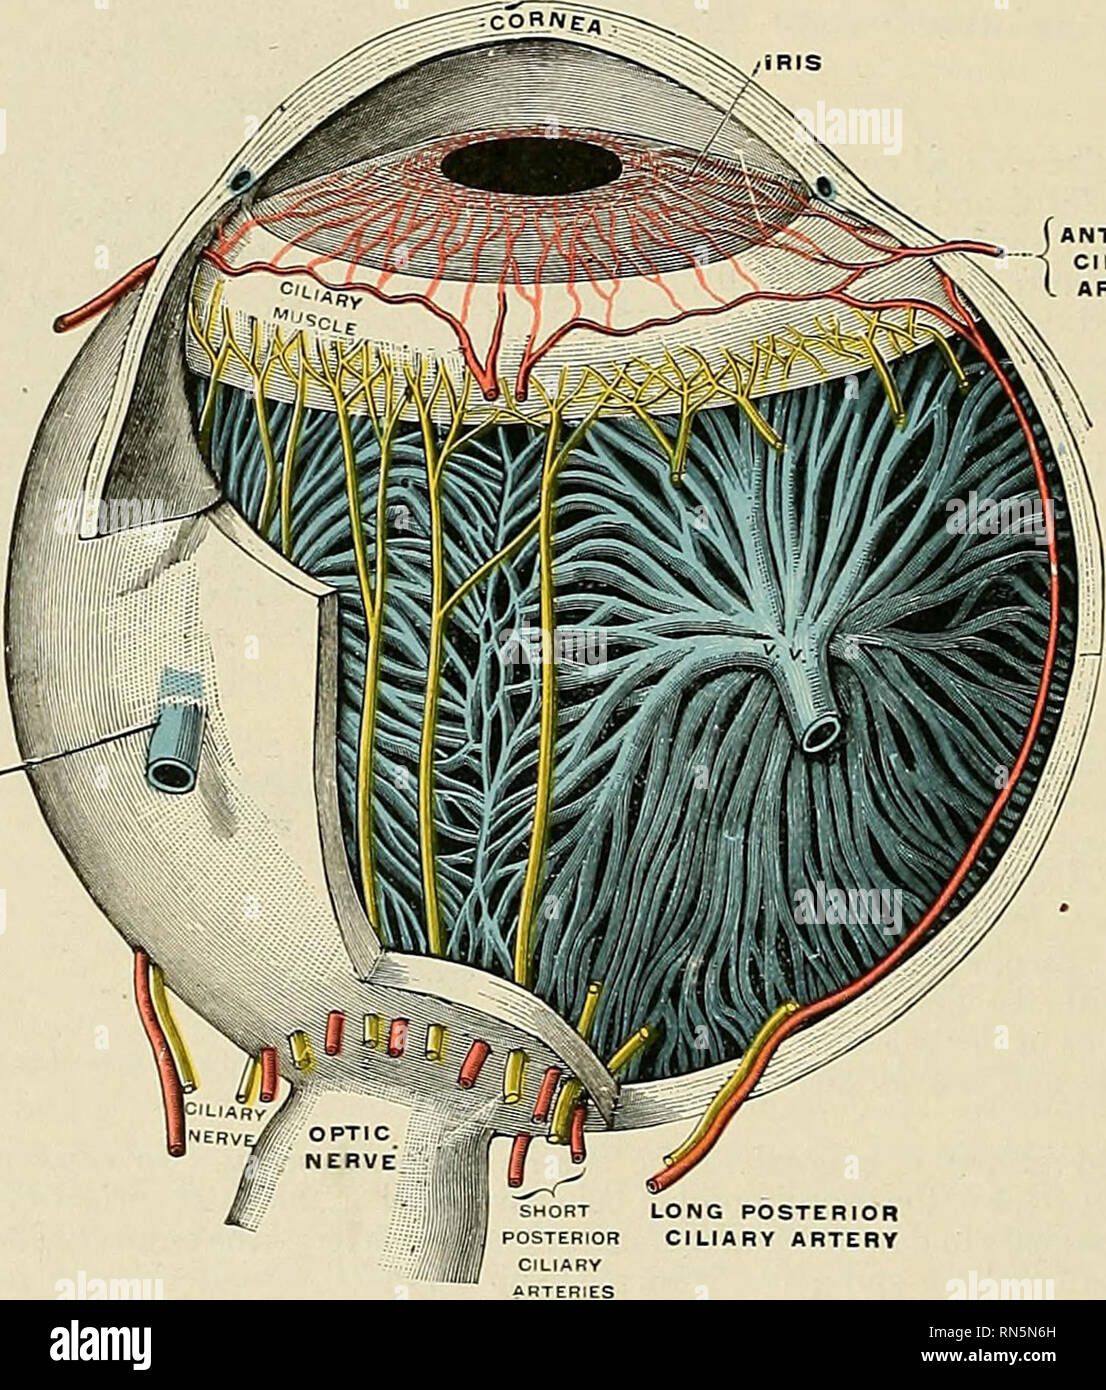 . Anatomy, descriptive and applied. Anatomy. 1094 THE ORGANS OF SPECIAL SENSE The Ciliary Body (corpus ciliare) (Fig. 813) joins the choroid to the margin of the iris. It is in reality a process of the choroid and comprises the orbicularis ciliaris, the ciliary processes, and the Ciliary muscle. The orbiculus ciliaris (Figs. 811 and 812) is a zone of about 4 mm. (| inch) in width, directly continuous -Rath the anterior part of the choroid; it presents numerous ridges arranged in a radial manner. The depressions between the ridges are filled with retinal pigment epithelium (Szymonowicz). The or Stock Photo